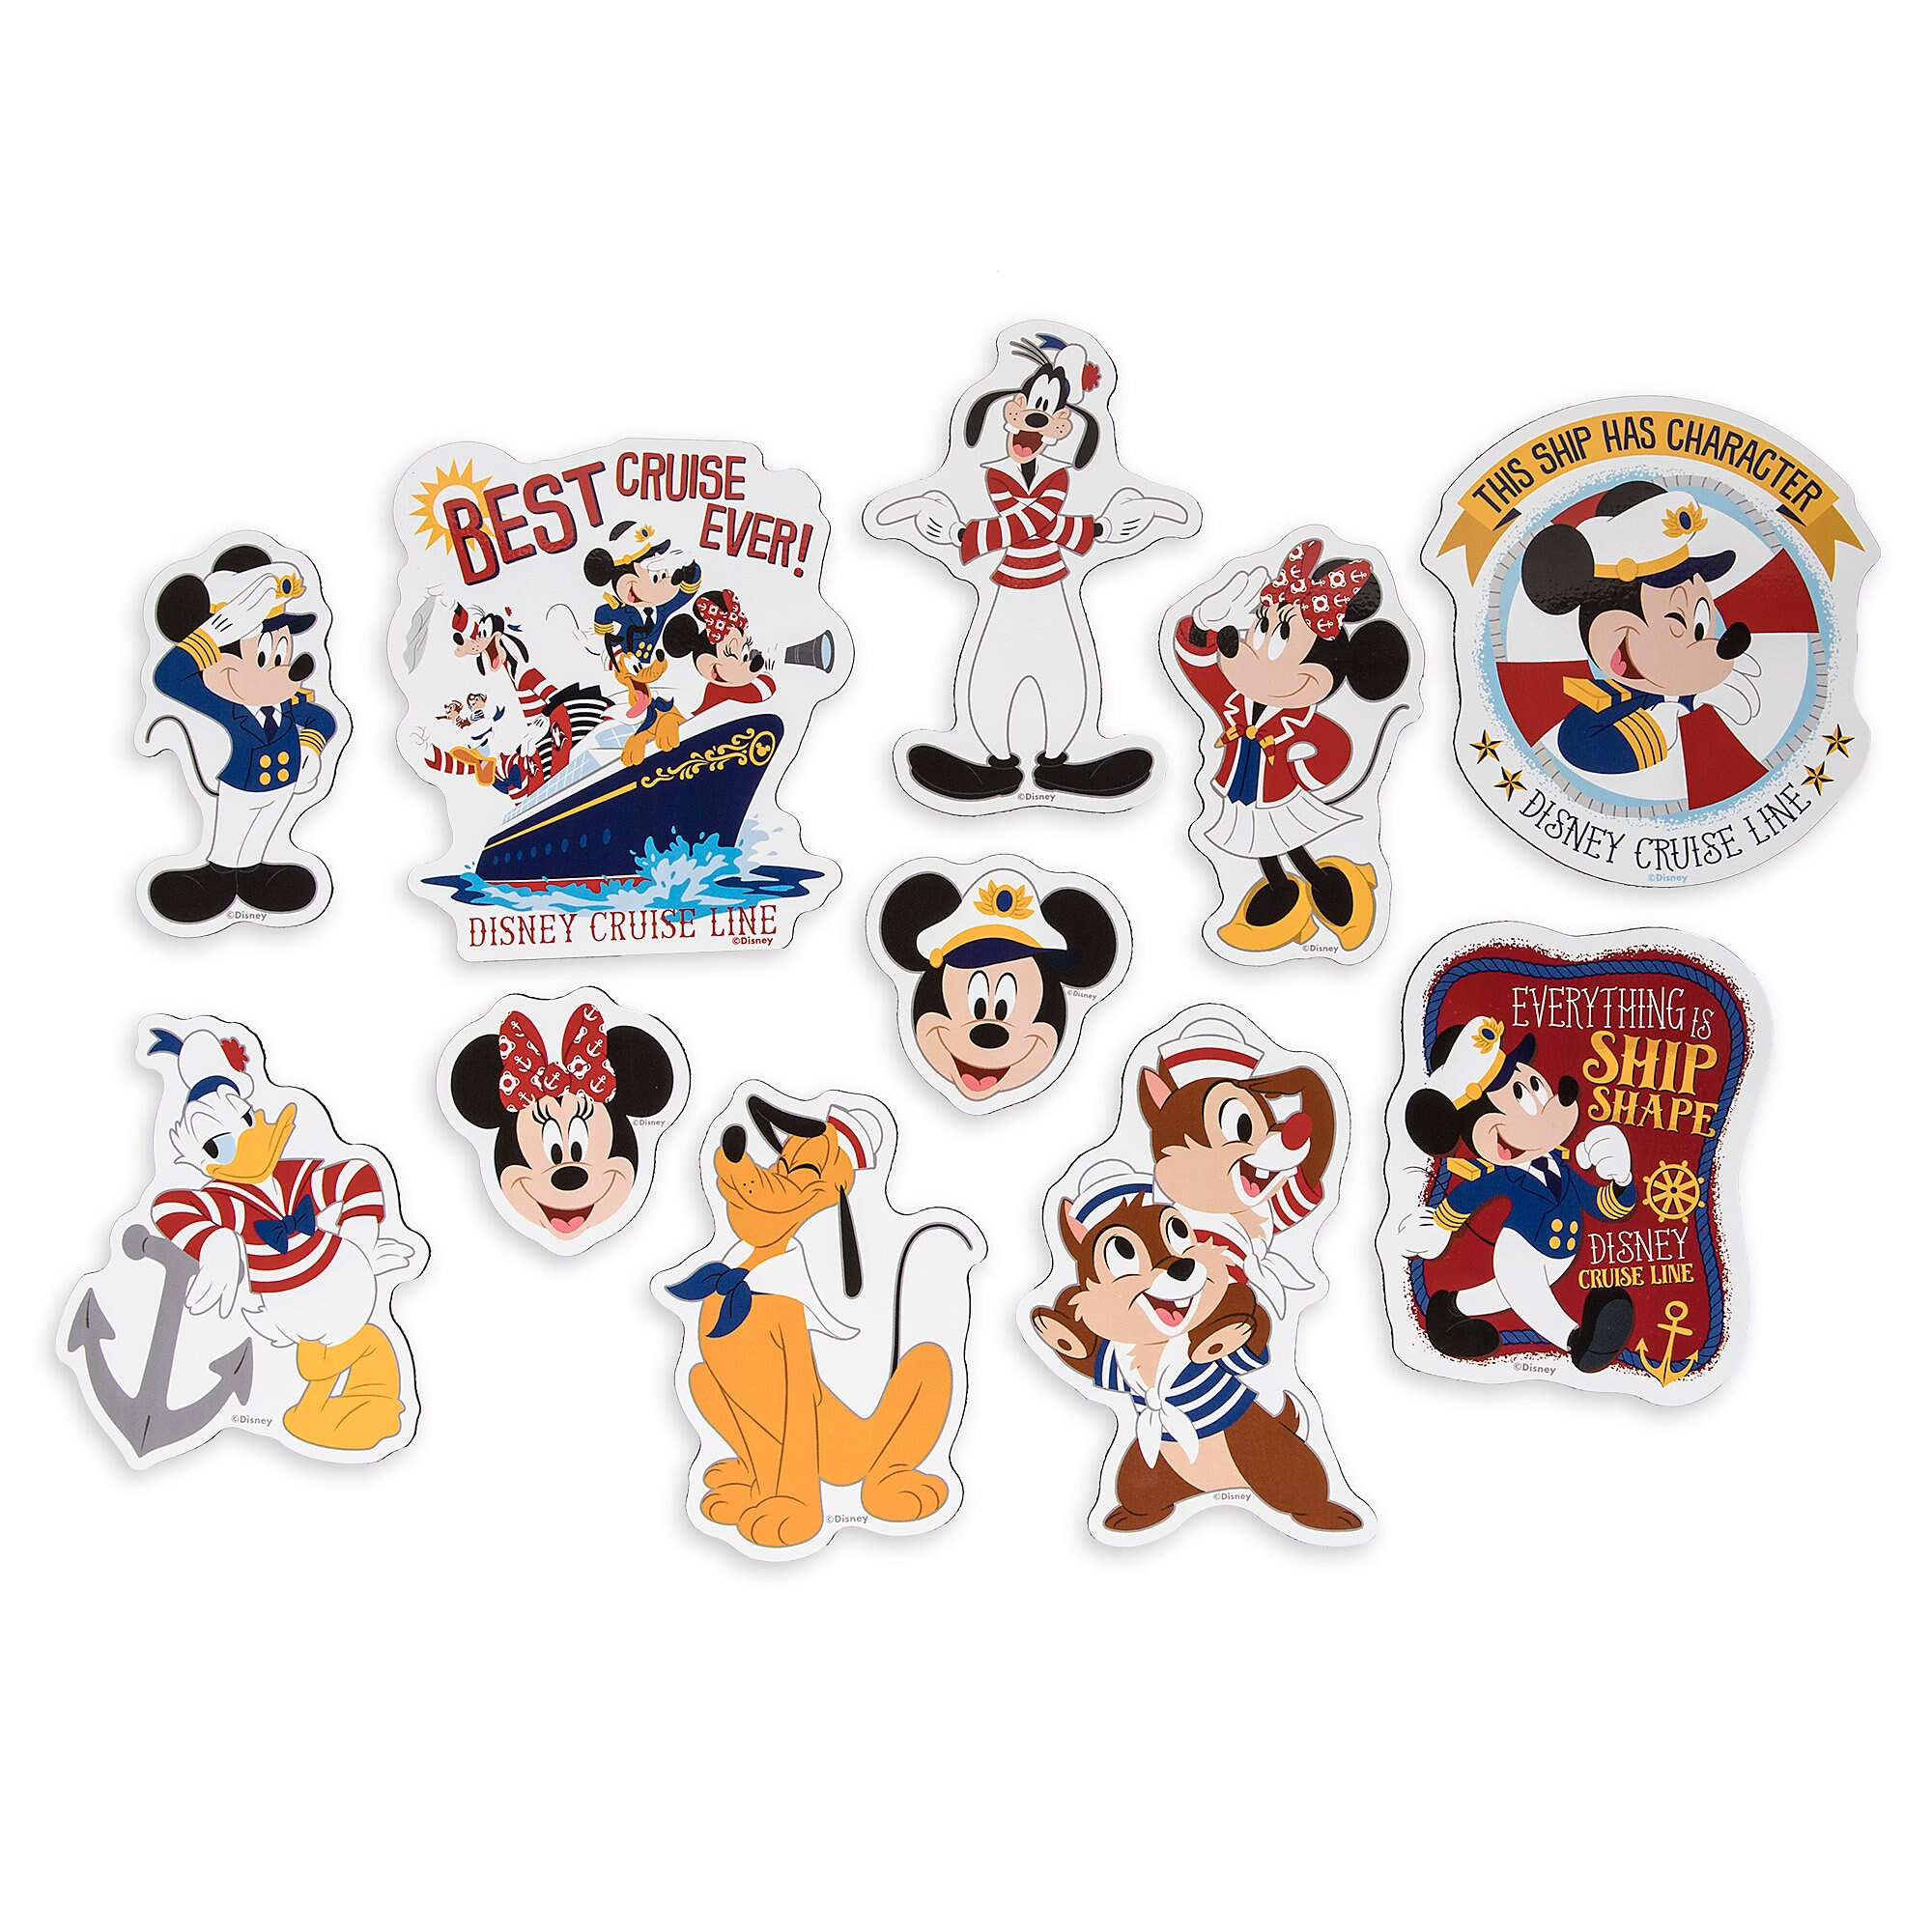 Captain Mickey Mouse and Crew Stateroom Door Magnet Set - Disney Cruise Line